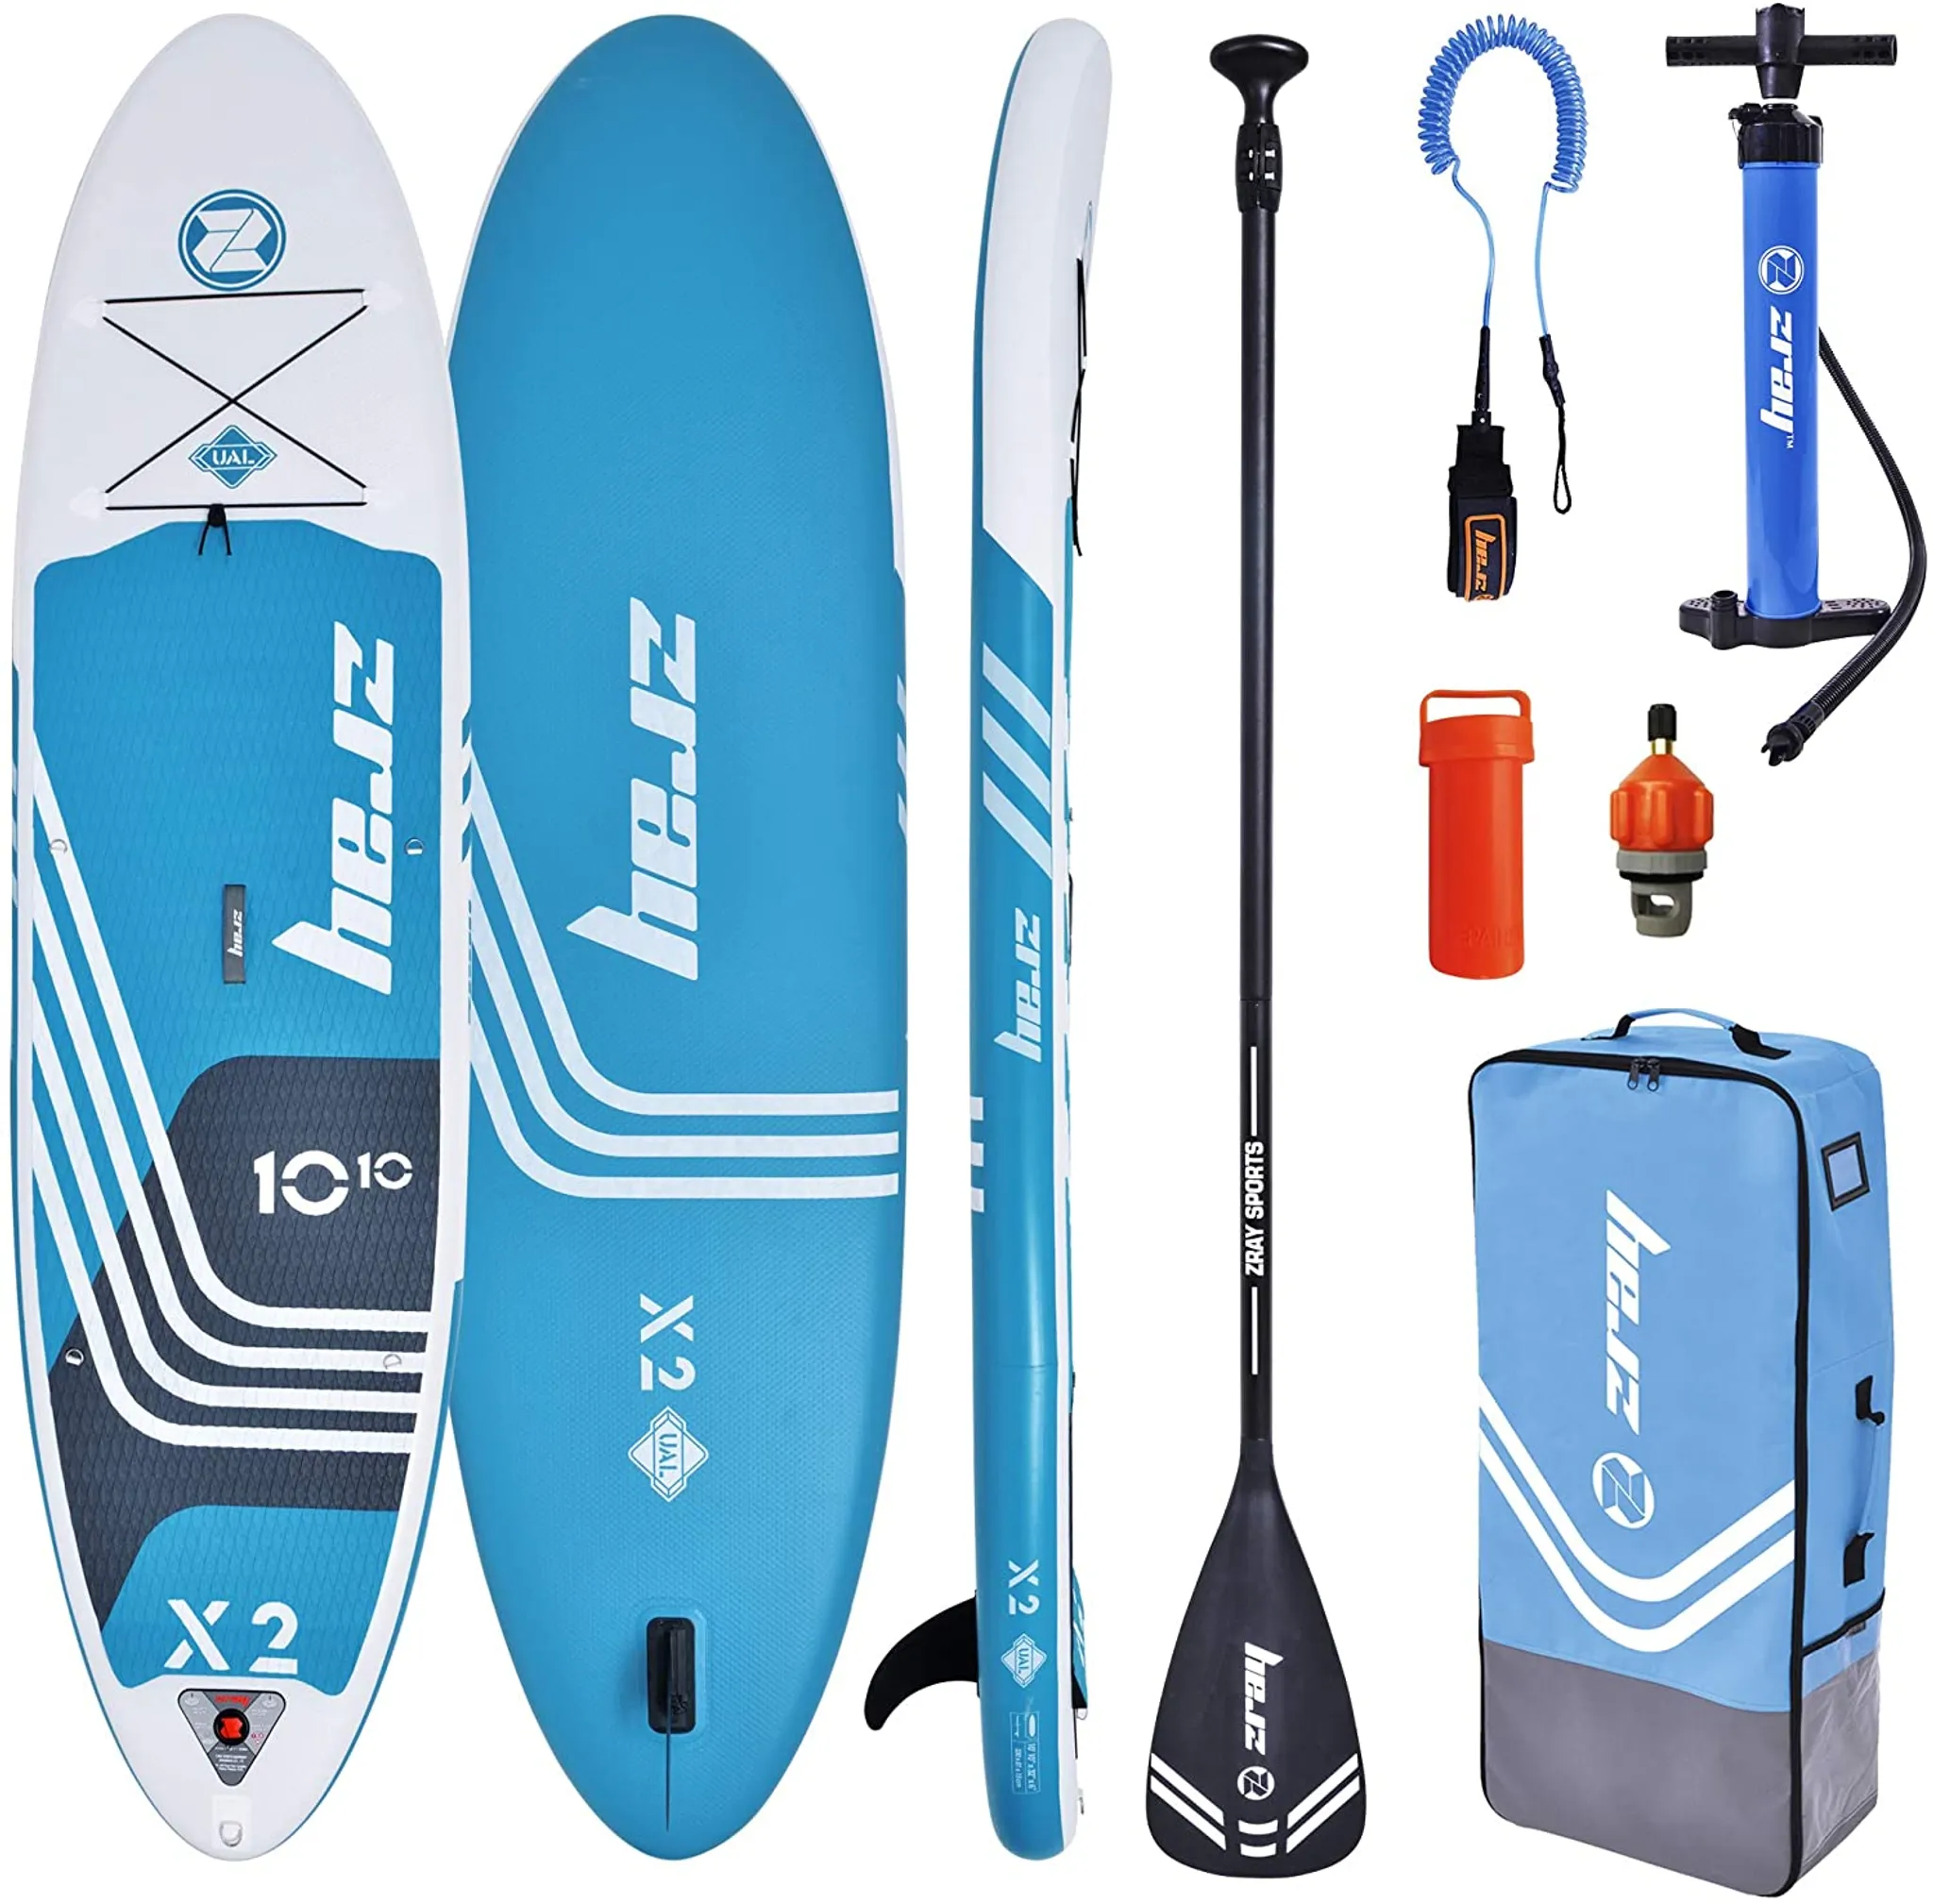 Zray Board Up Paddle 10.10 X2 SUP Stand